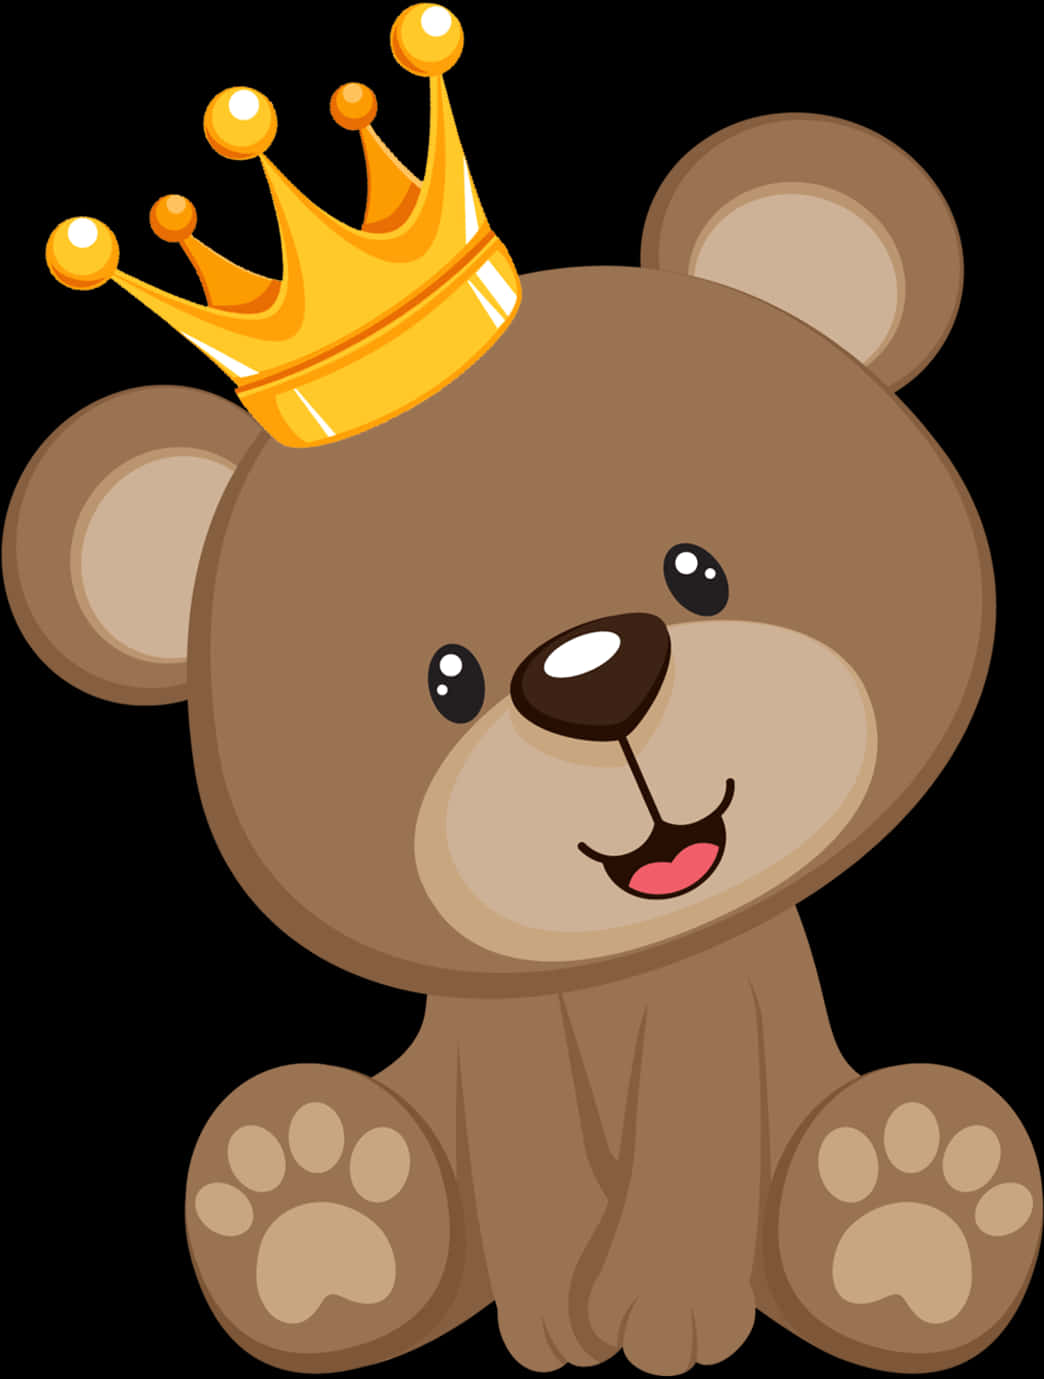 Baby Teddy Bear With Crown